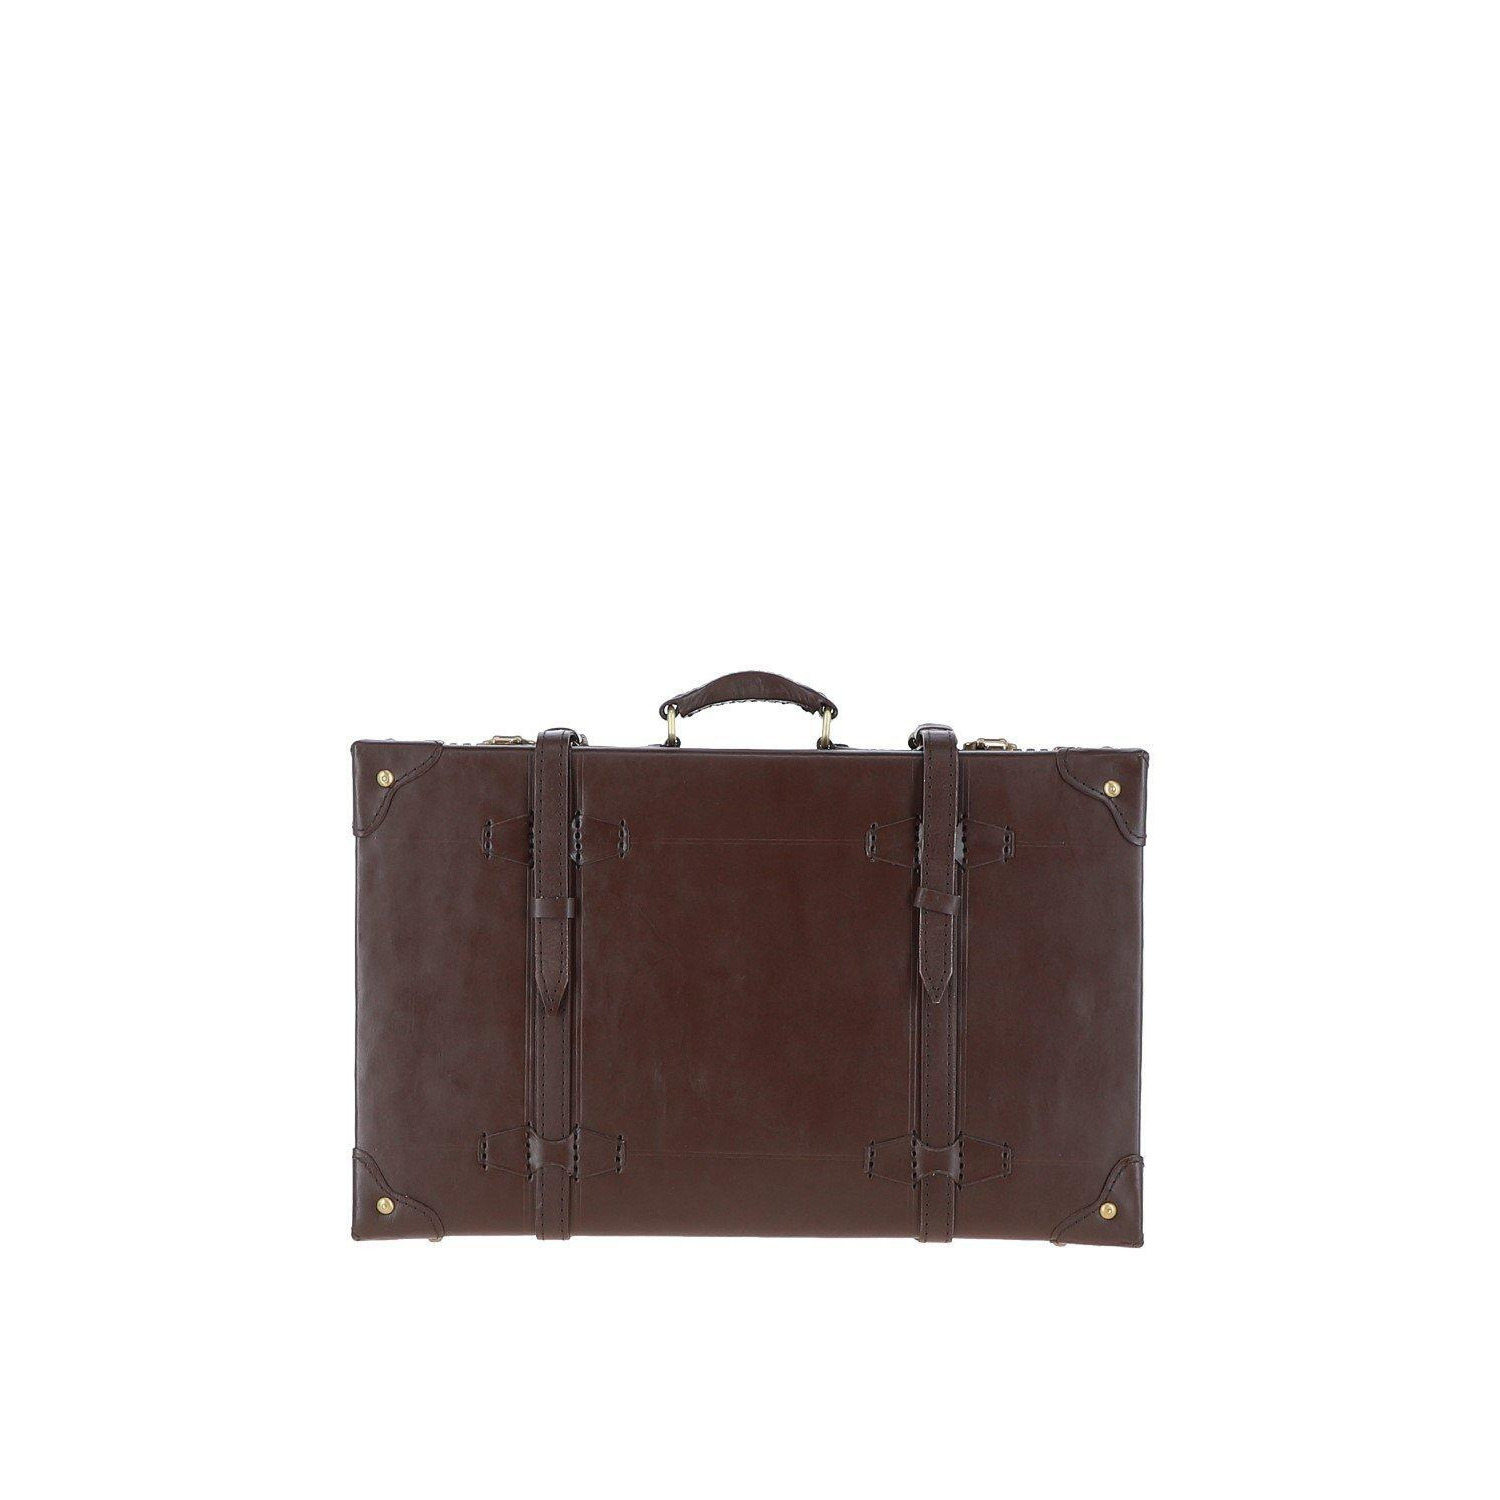 Roxana' Home Accessory Leather Trunk - image 1